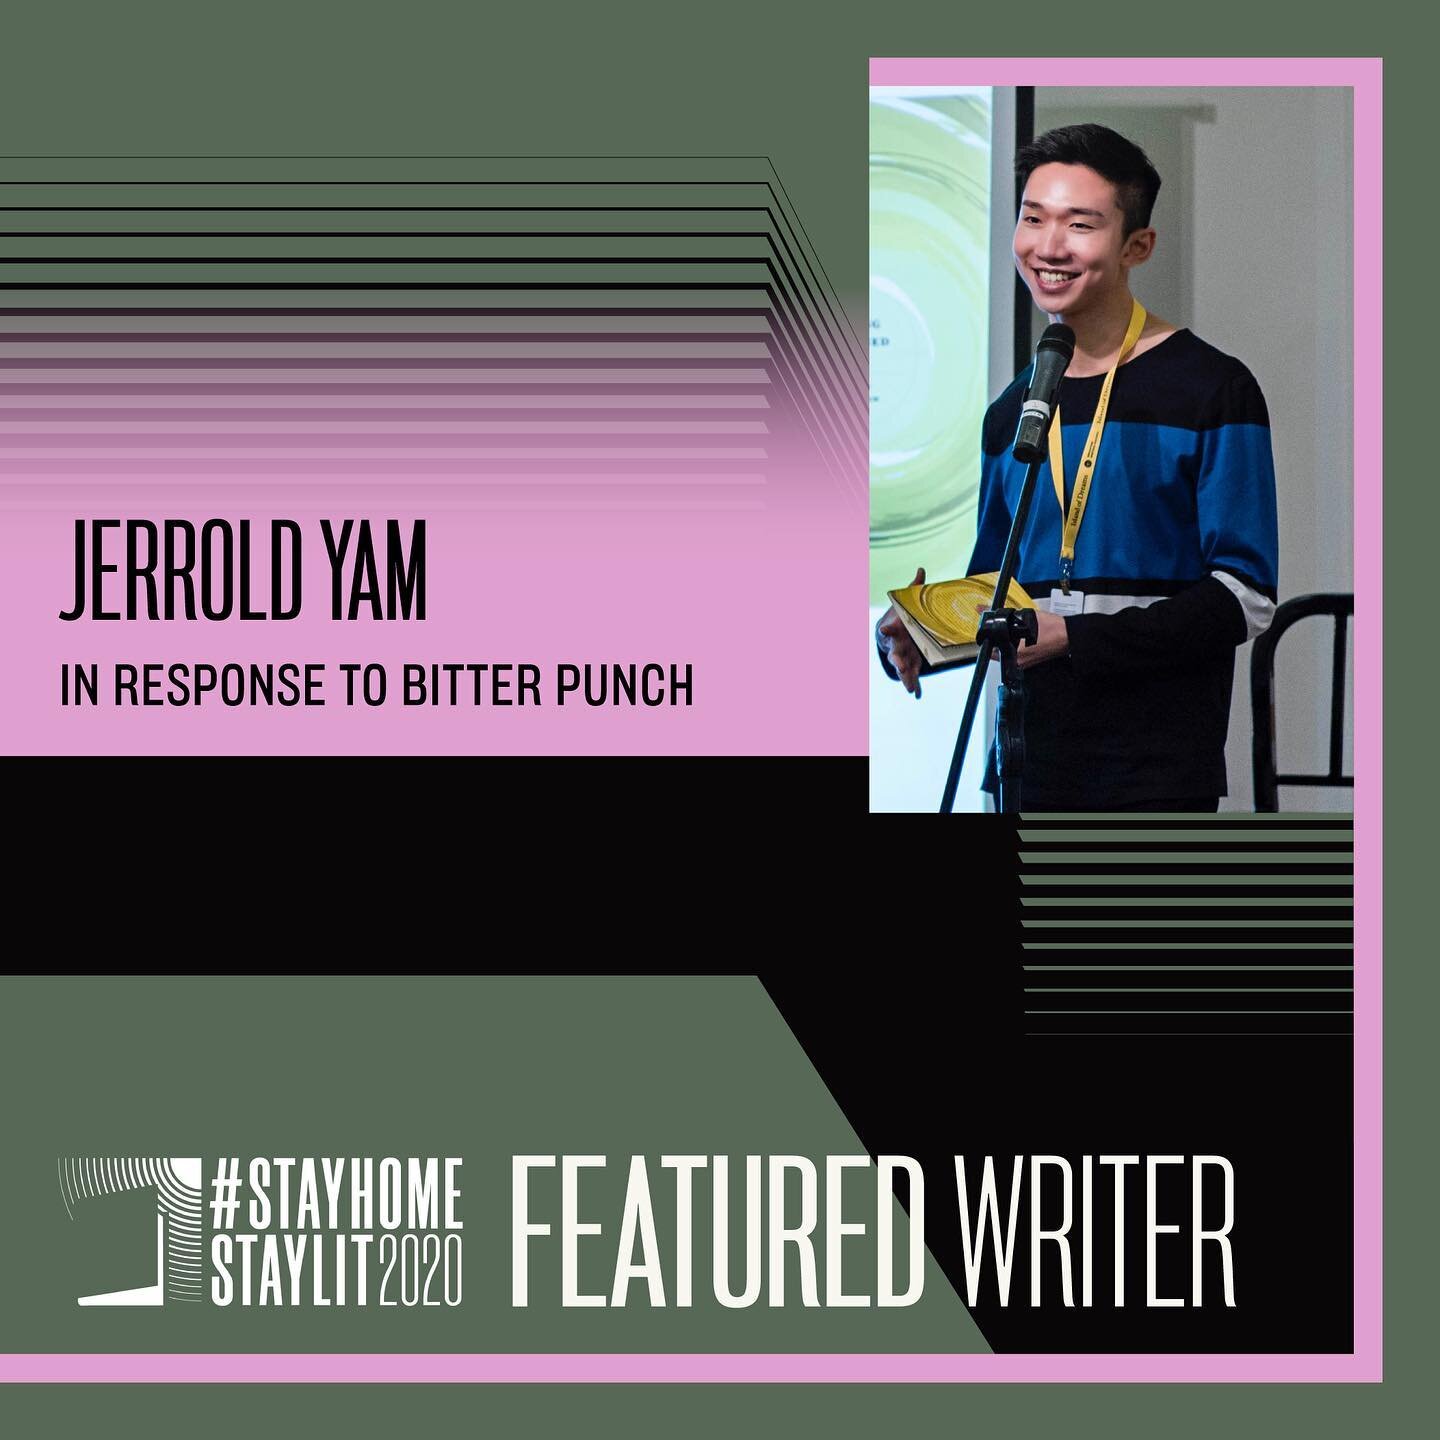 Fascinated by the spellbinding words tightly strung together? Read about the inspiration behind this dazzling narrative from writer Jerrold Yam (@jerroldyam) below:  Guan Liang's poem &quot;Like and Share&quot; is a sardonic examination of the unreli